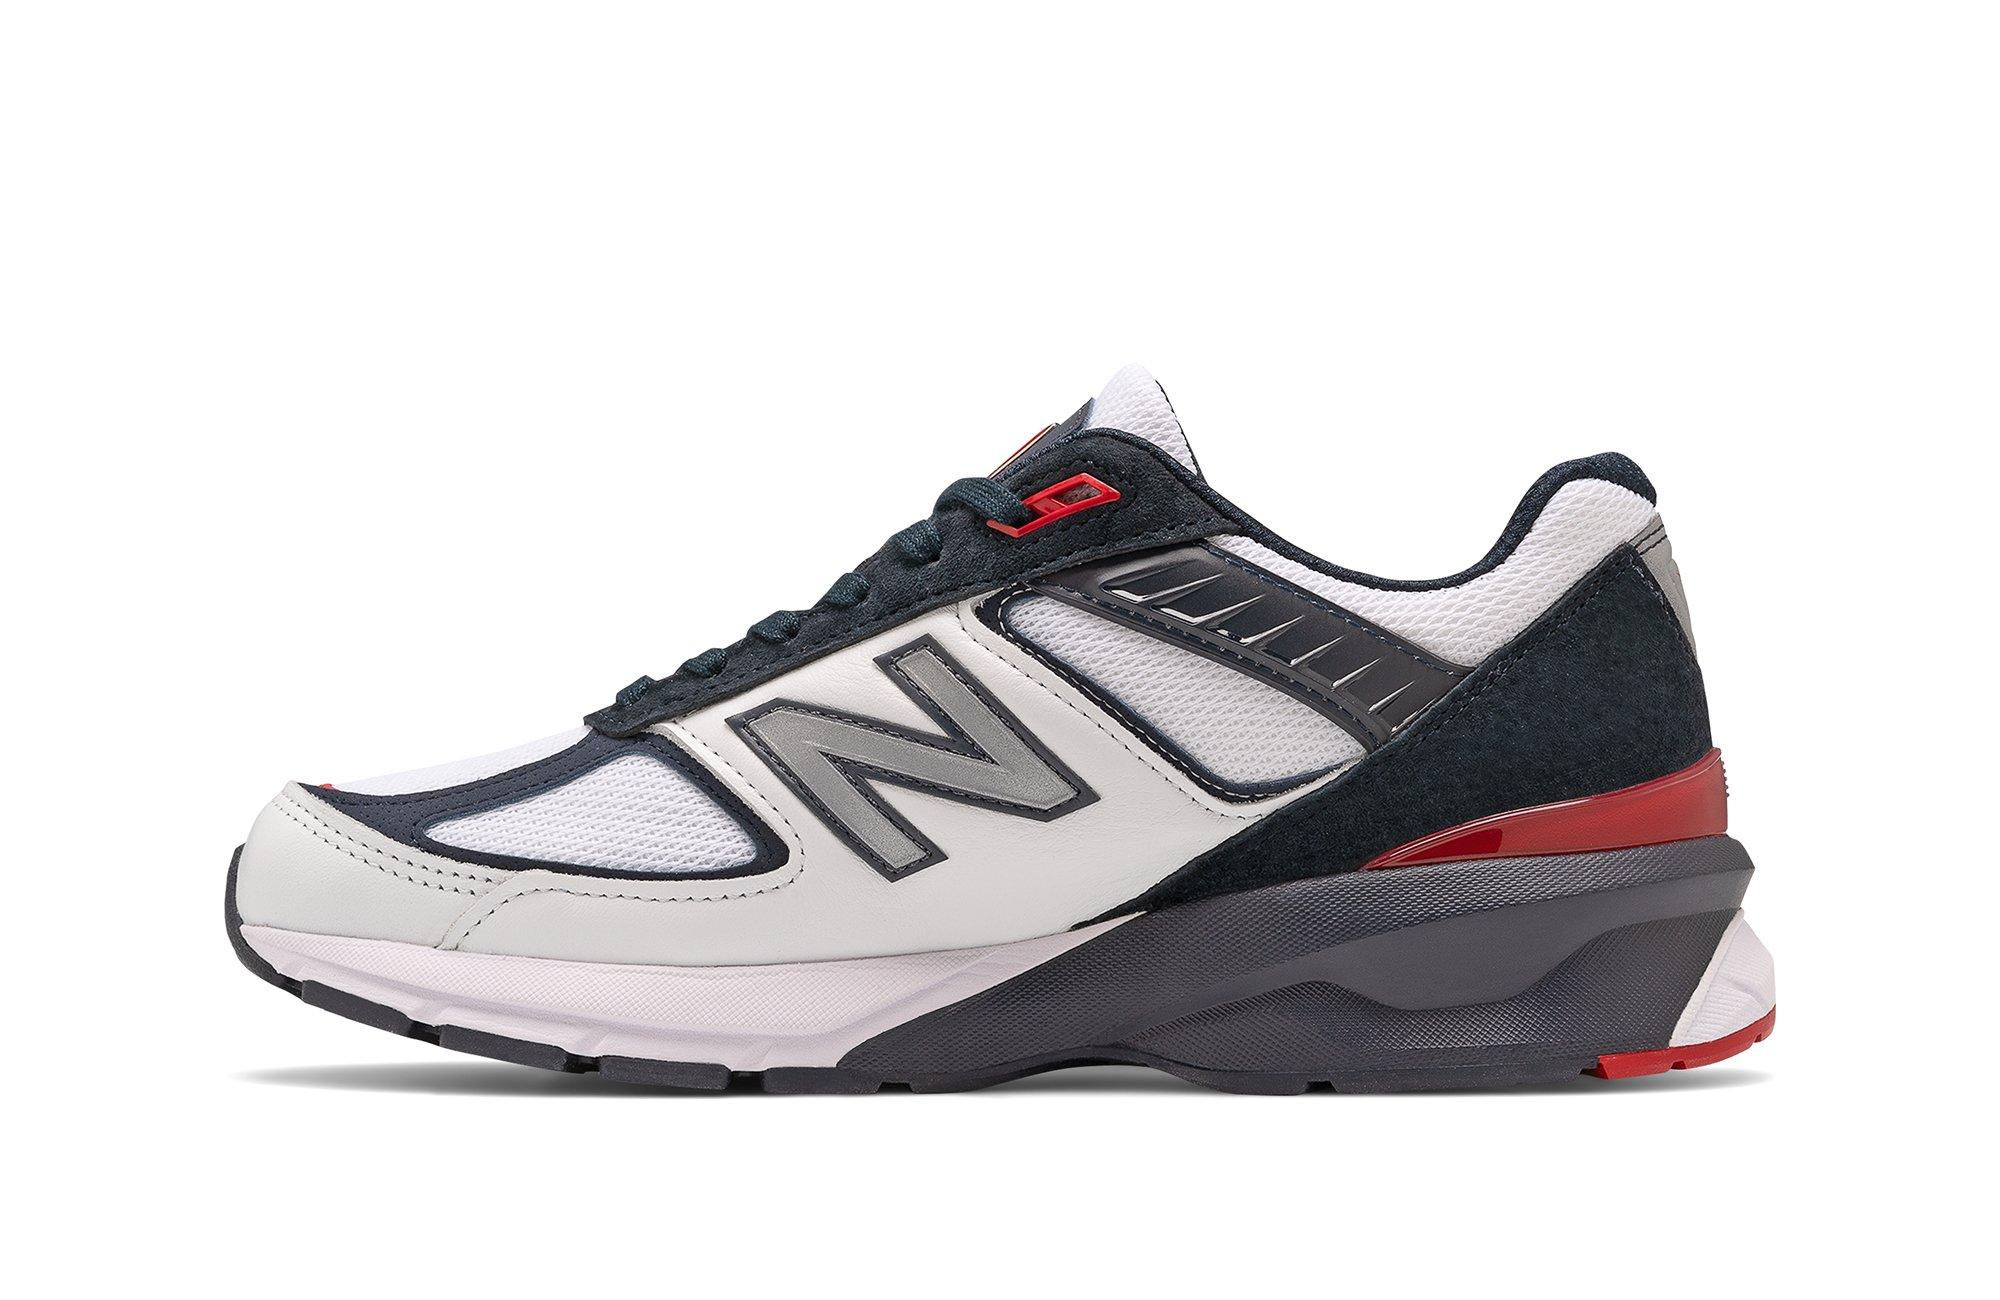 Sneakers Release – New Balance 990v5 “Carbon/Team Red& 